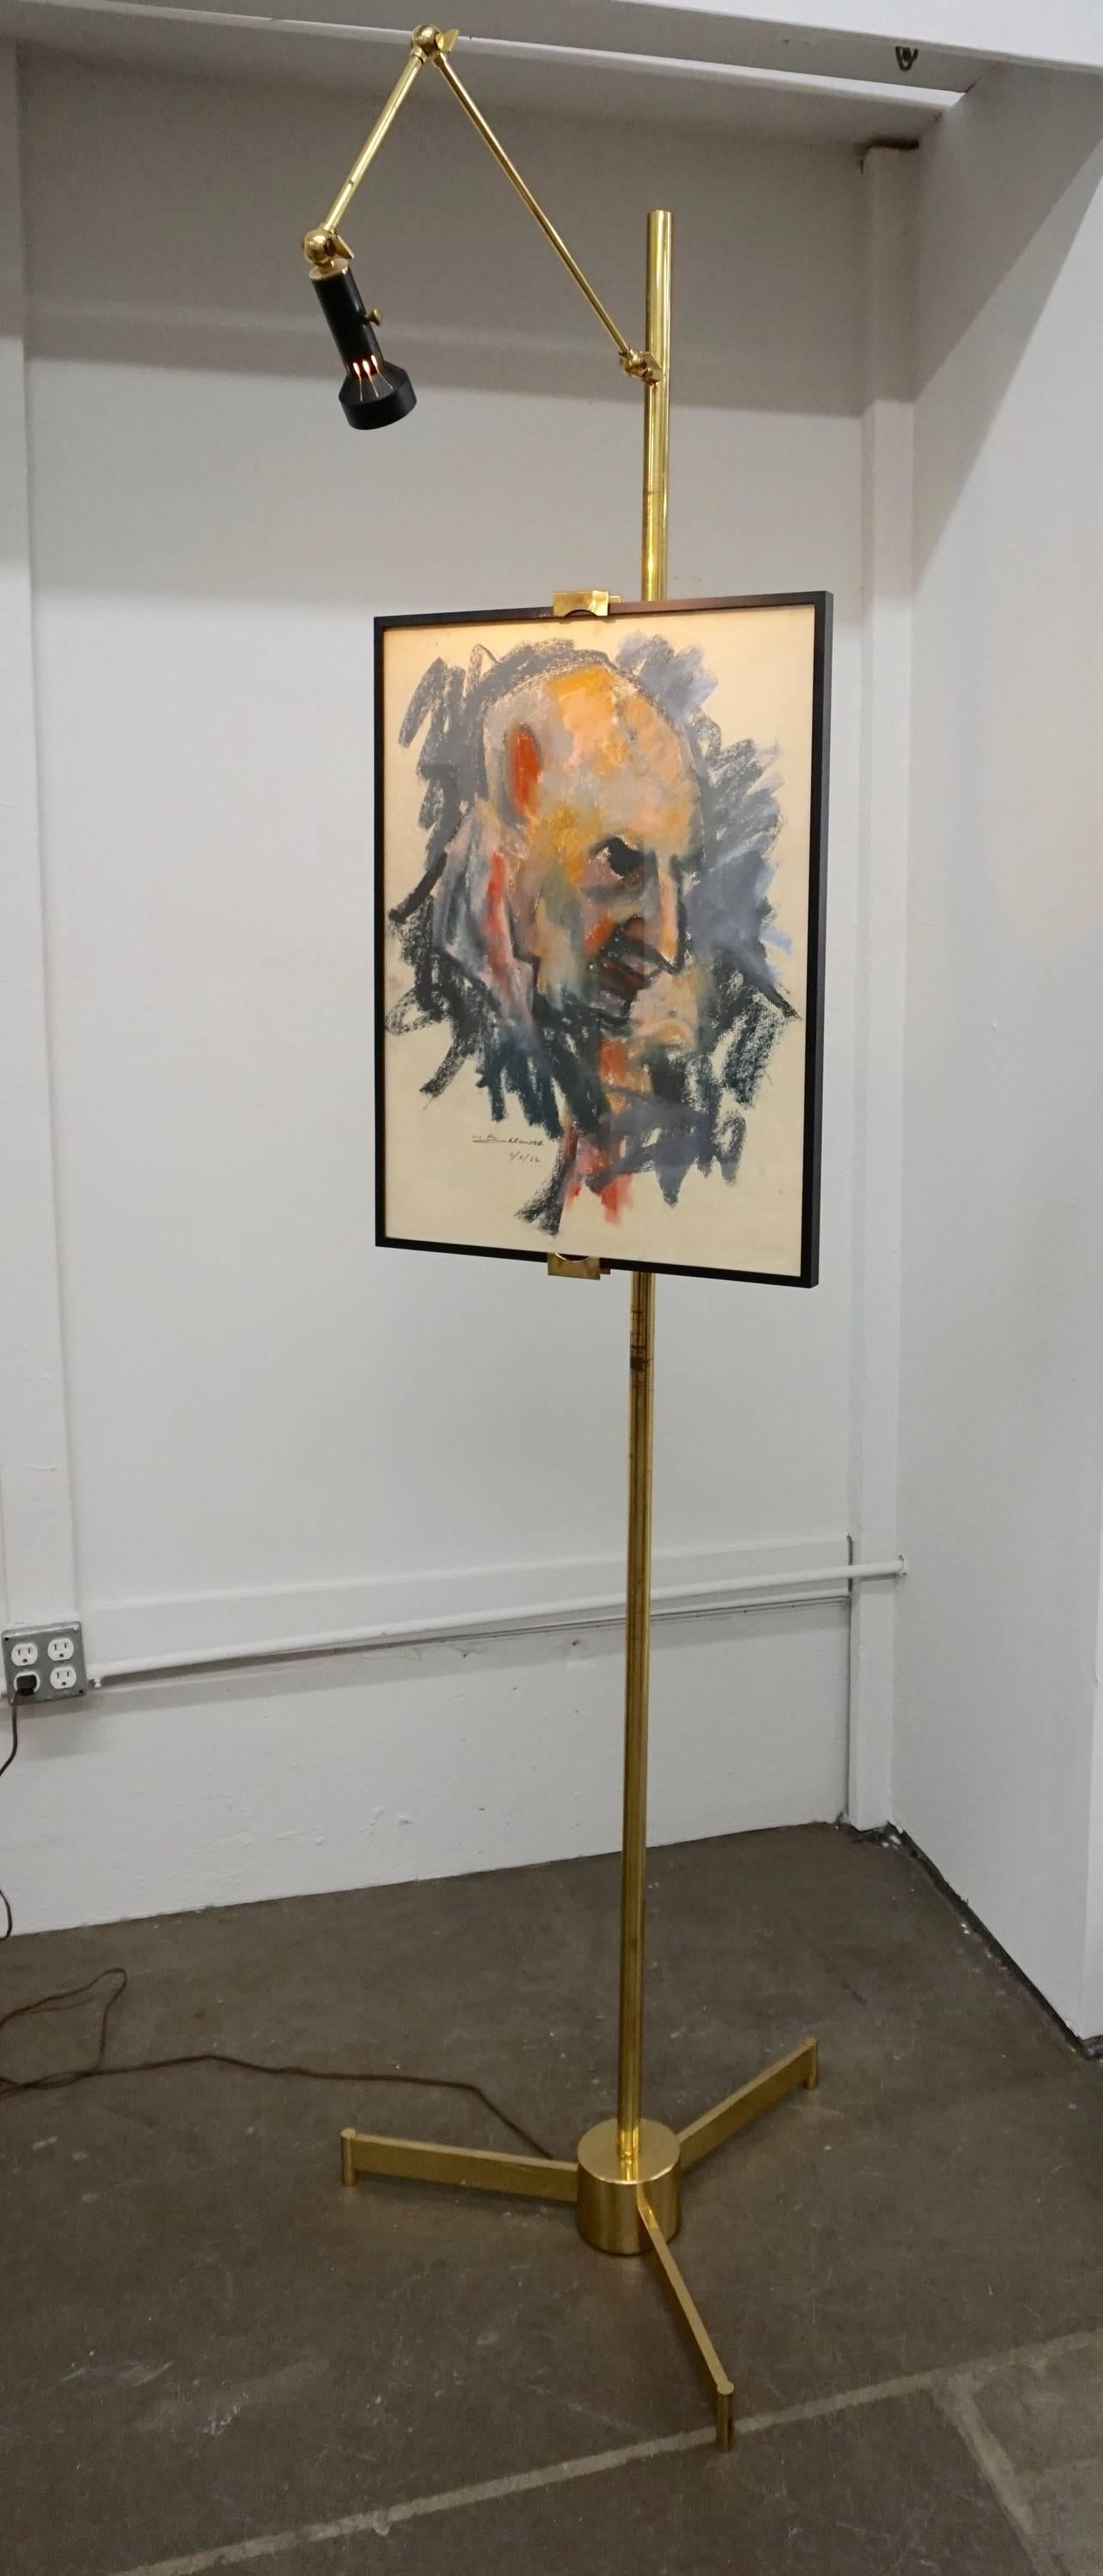 Adjustable clamps to secure artwork. The spotlight is fully adjustable to properly showcase your painting on this beautiful and unusual brass easel.